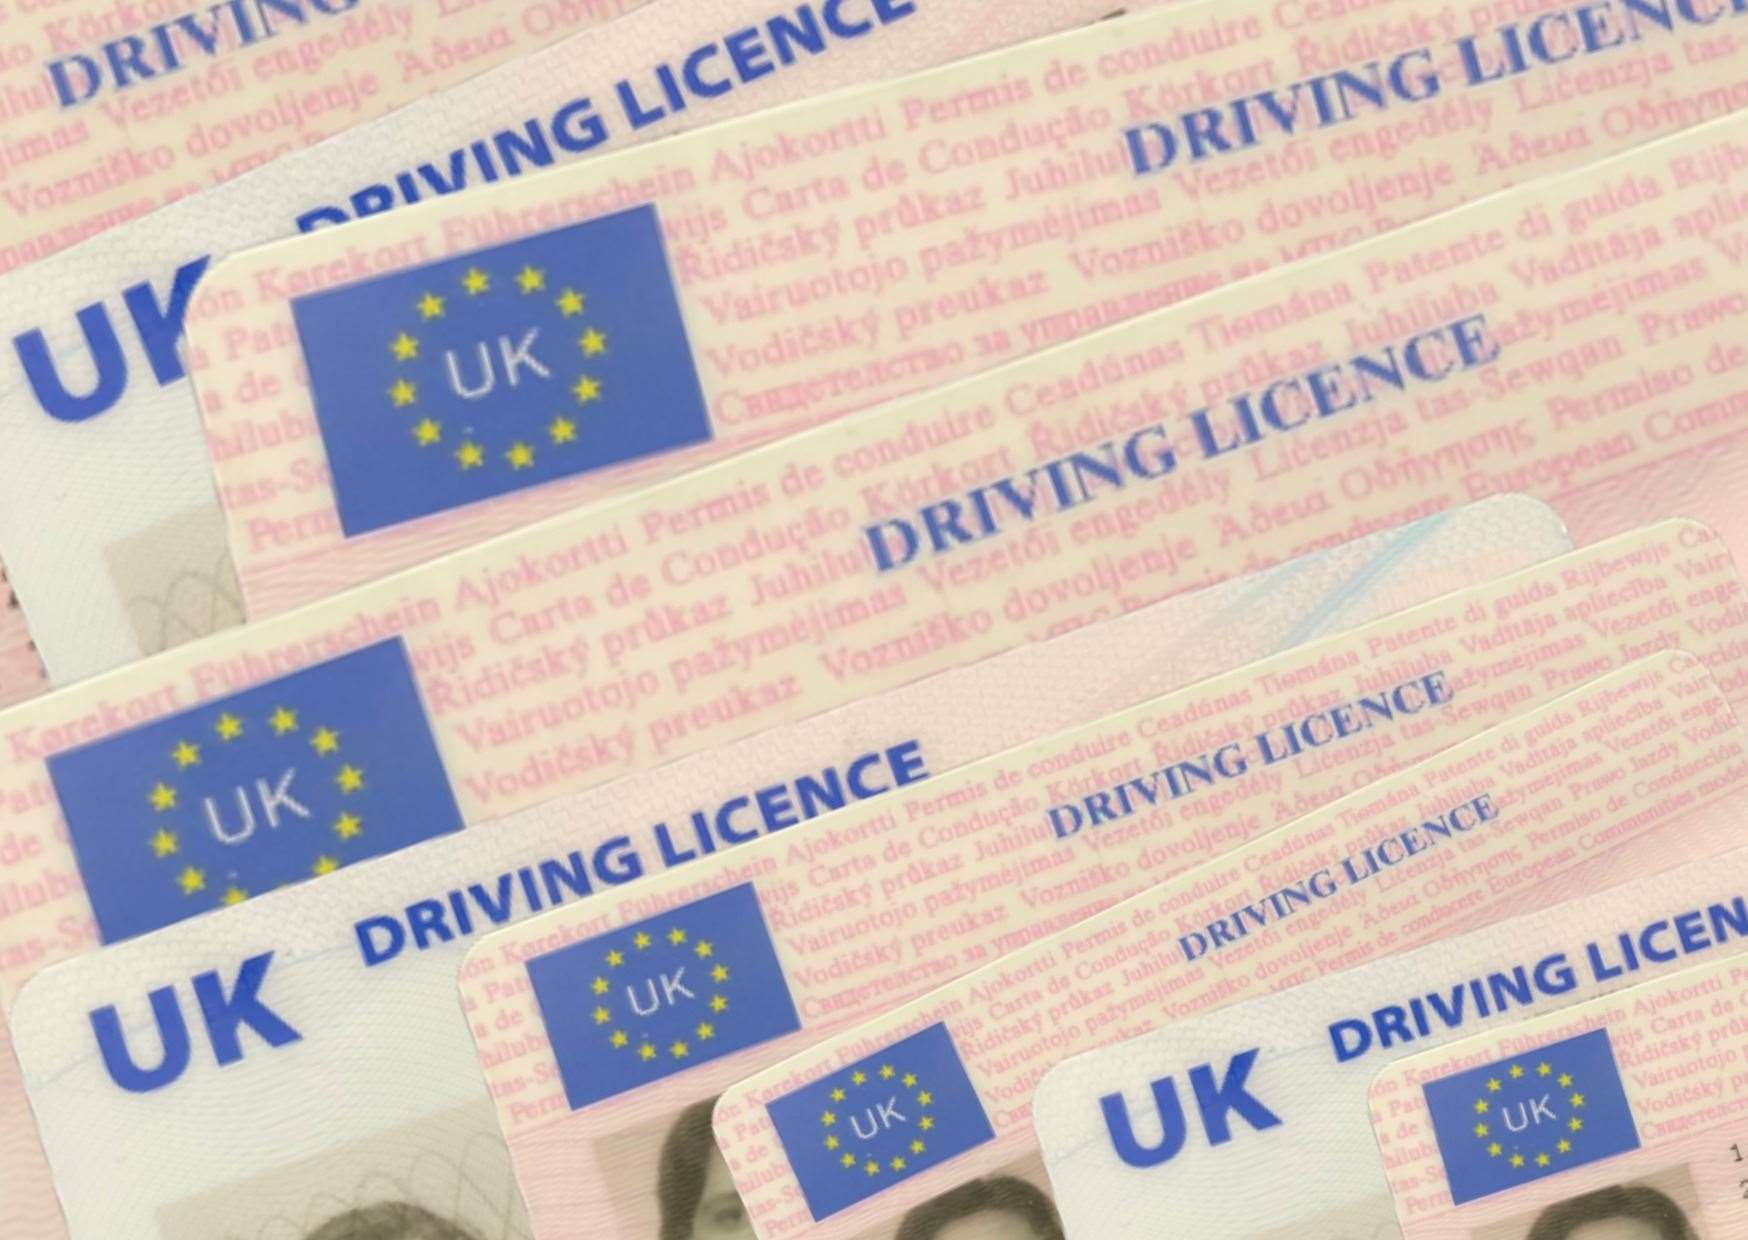 The vast majority of those caught without insurance did have a driving licence